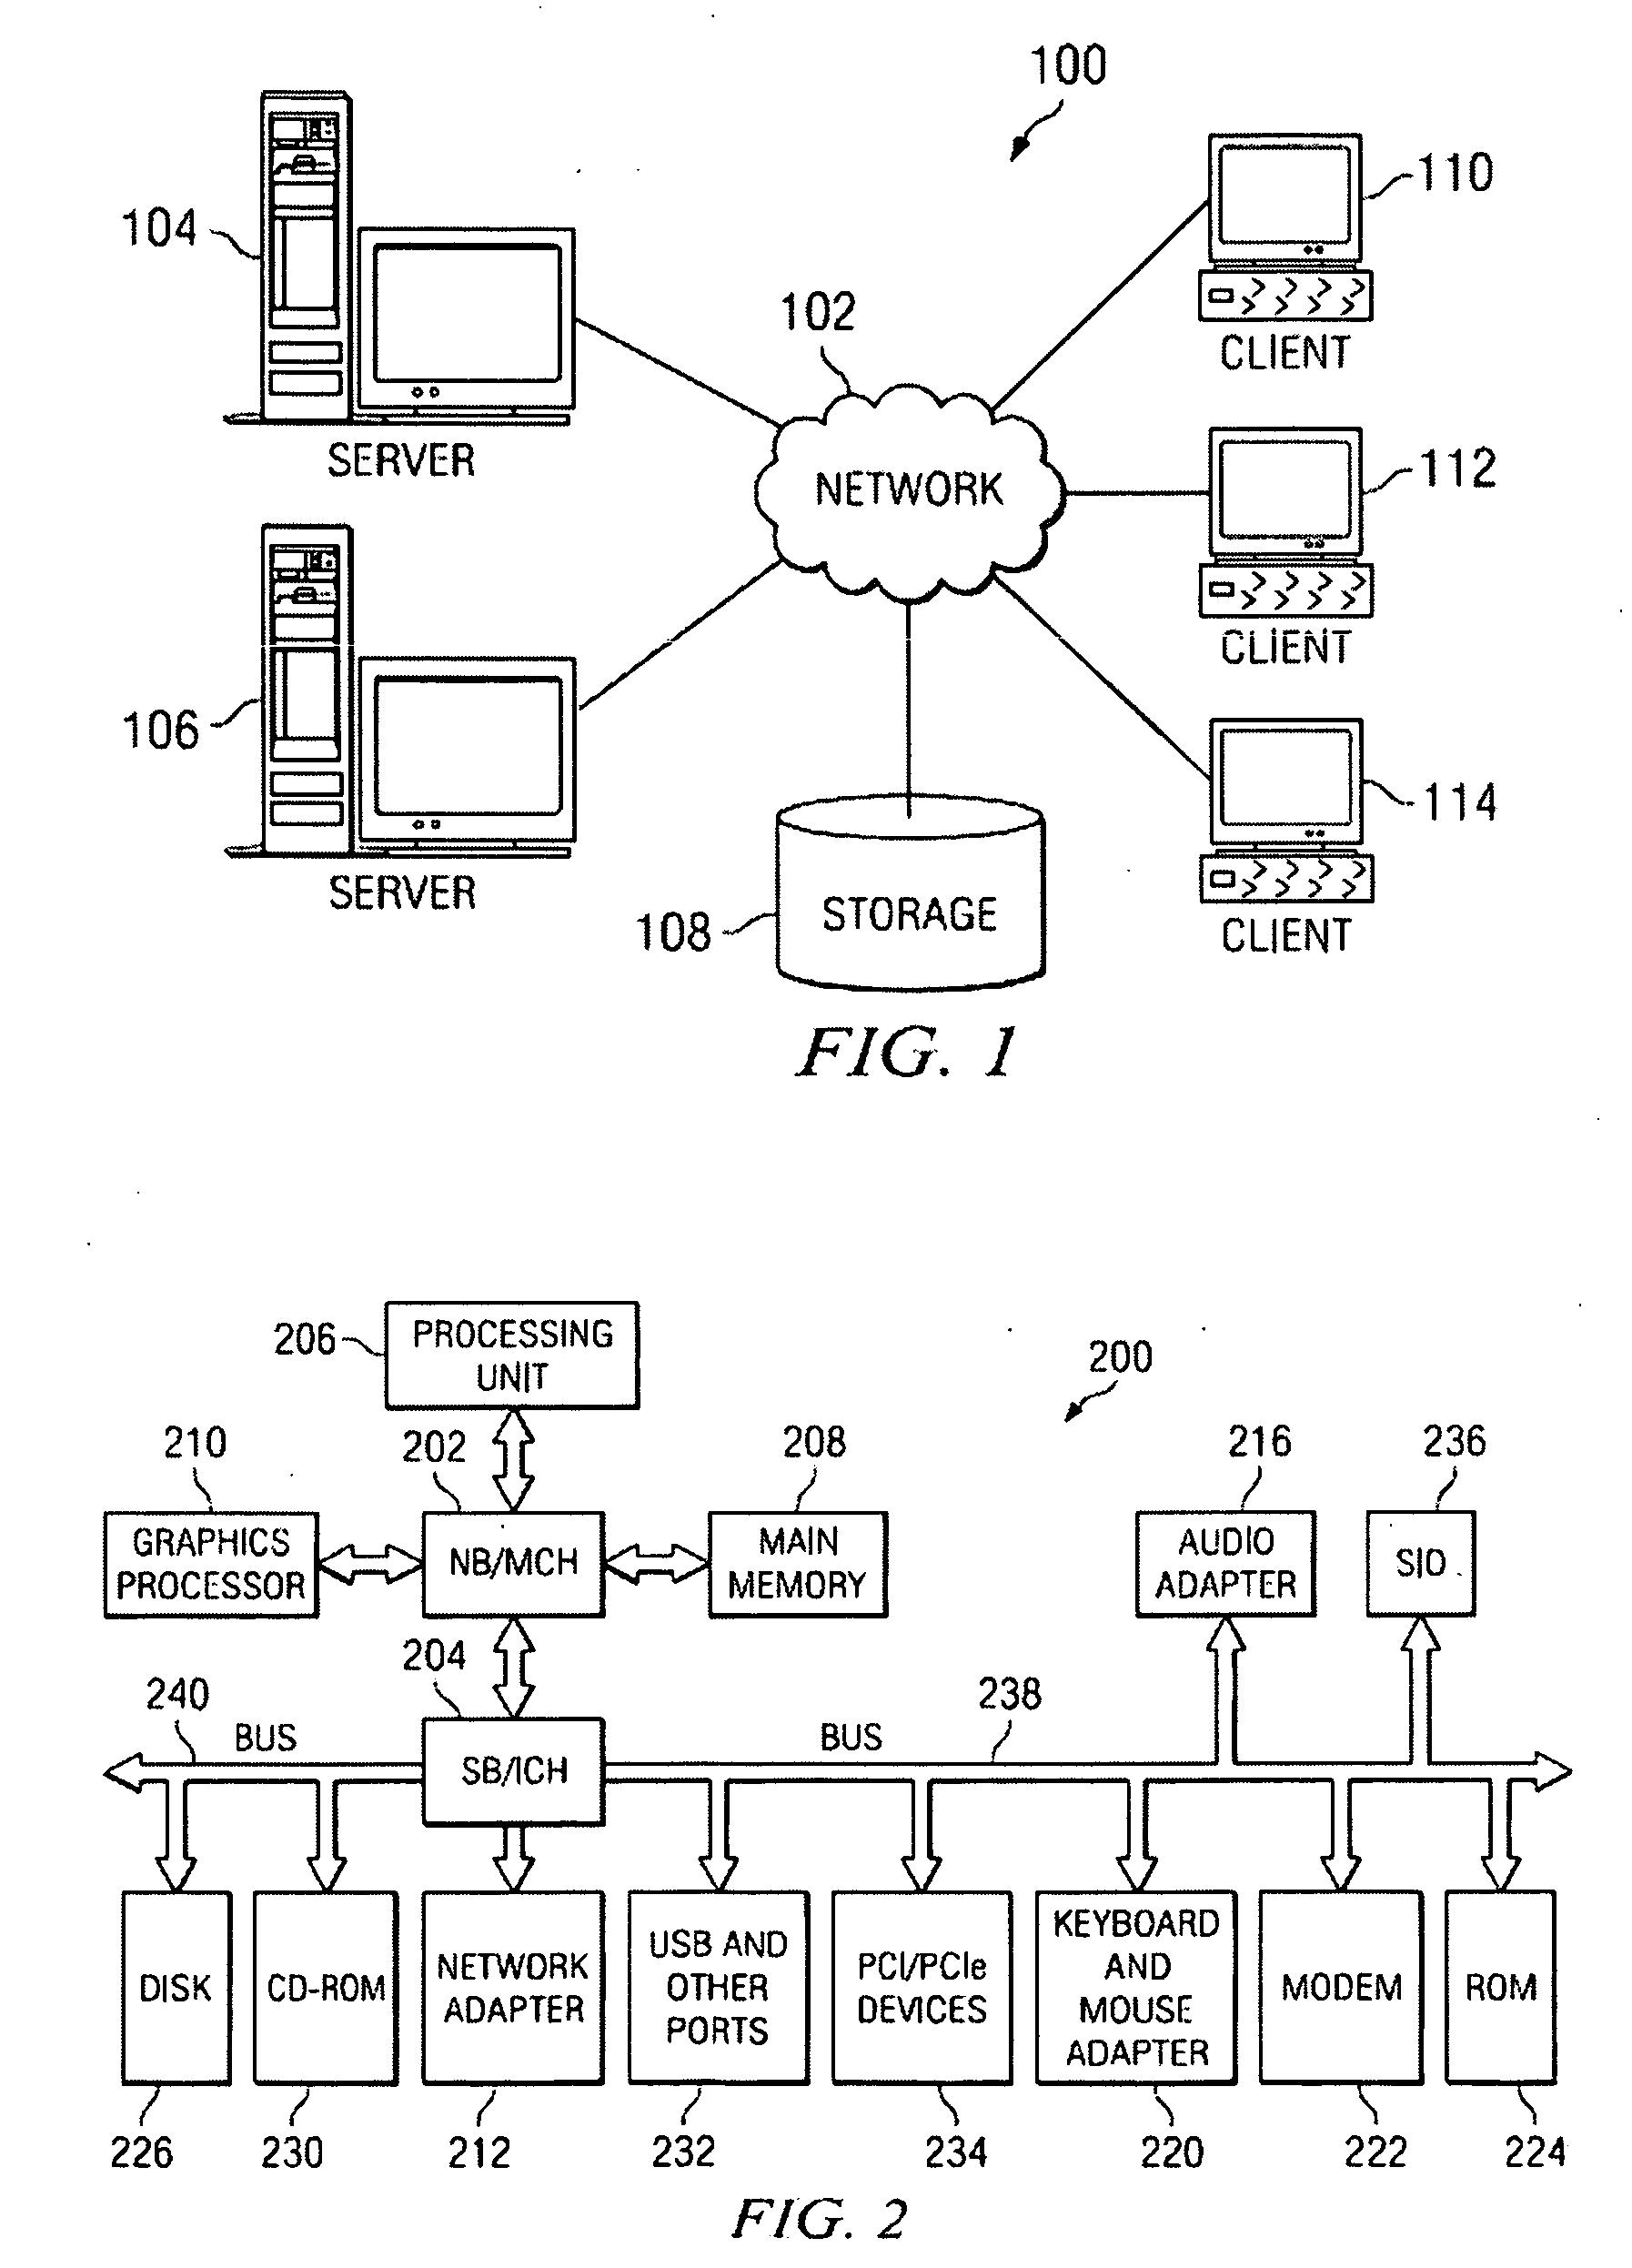 Method and system for secure document exchange